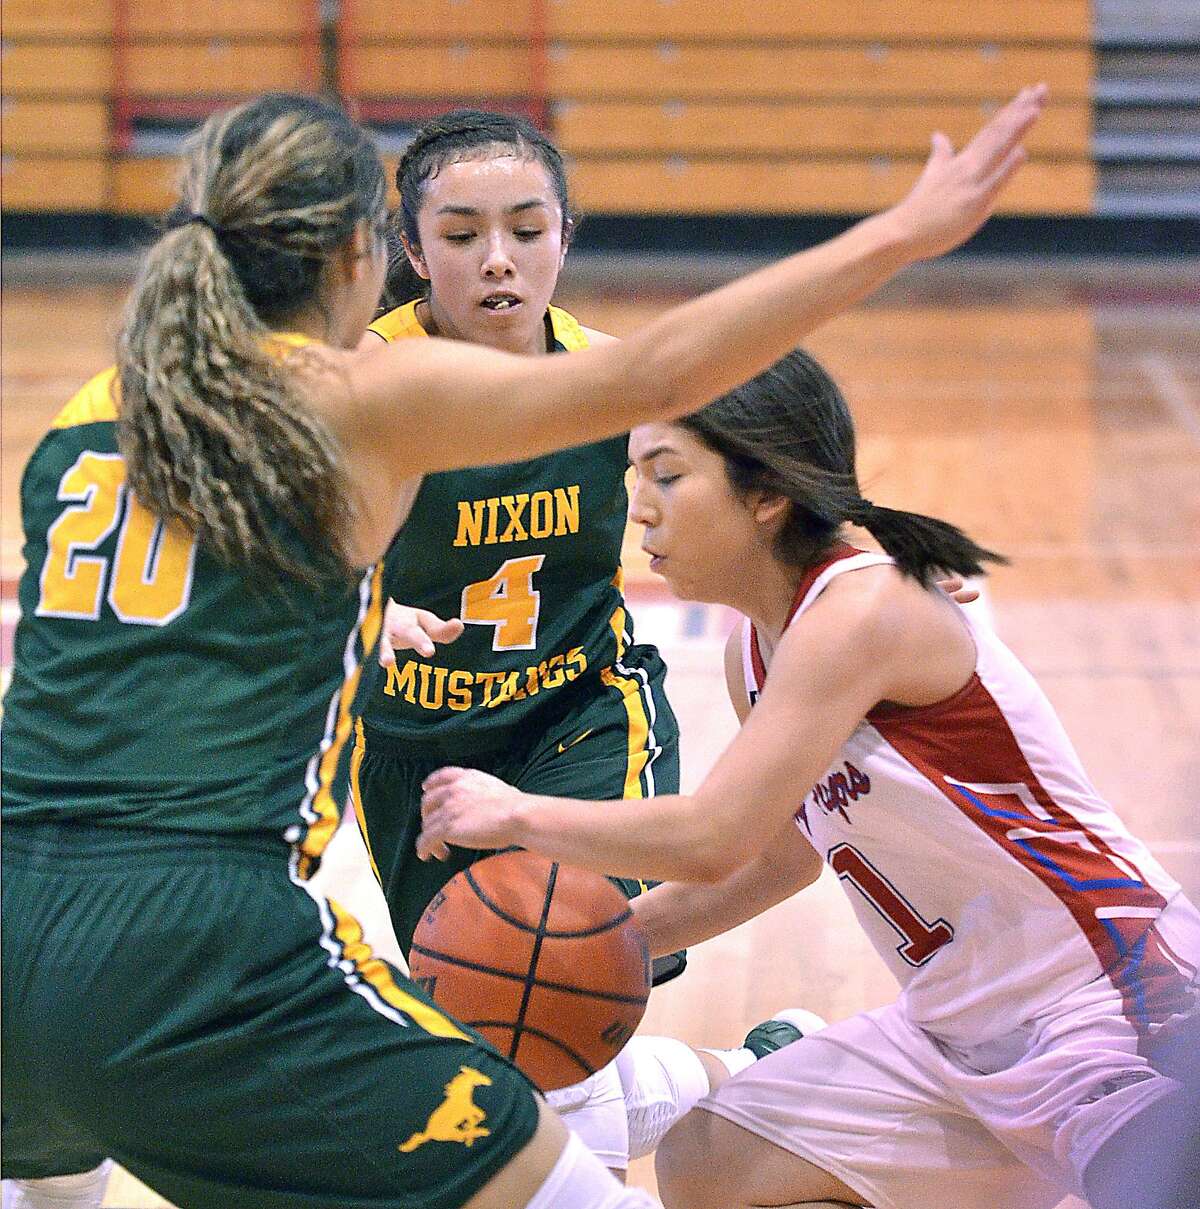 Atiana Adriano, Rut Moreno and Nixon held off Cielo Lares and Martin winning 41-37 over their LISD rivals Friday.